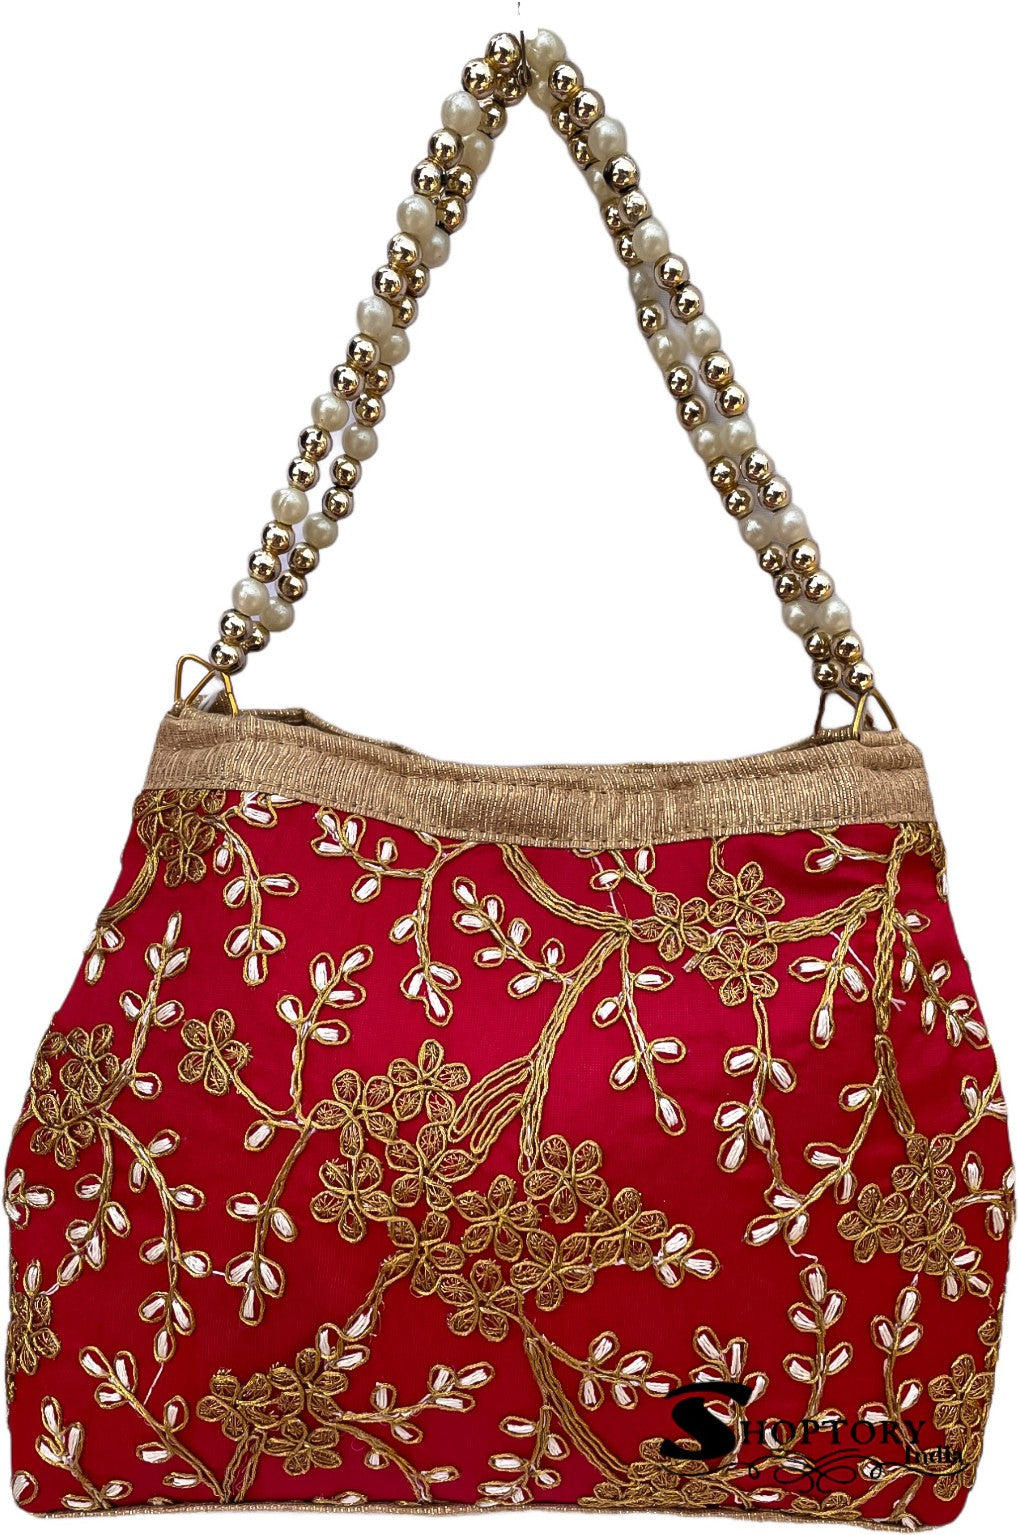 fcity.in - Rajasthani Jaipuri Ethnic Embroidered Women Clutch Hand Purses